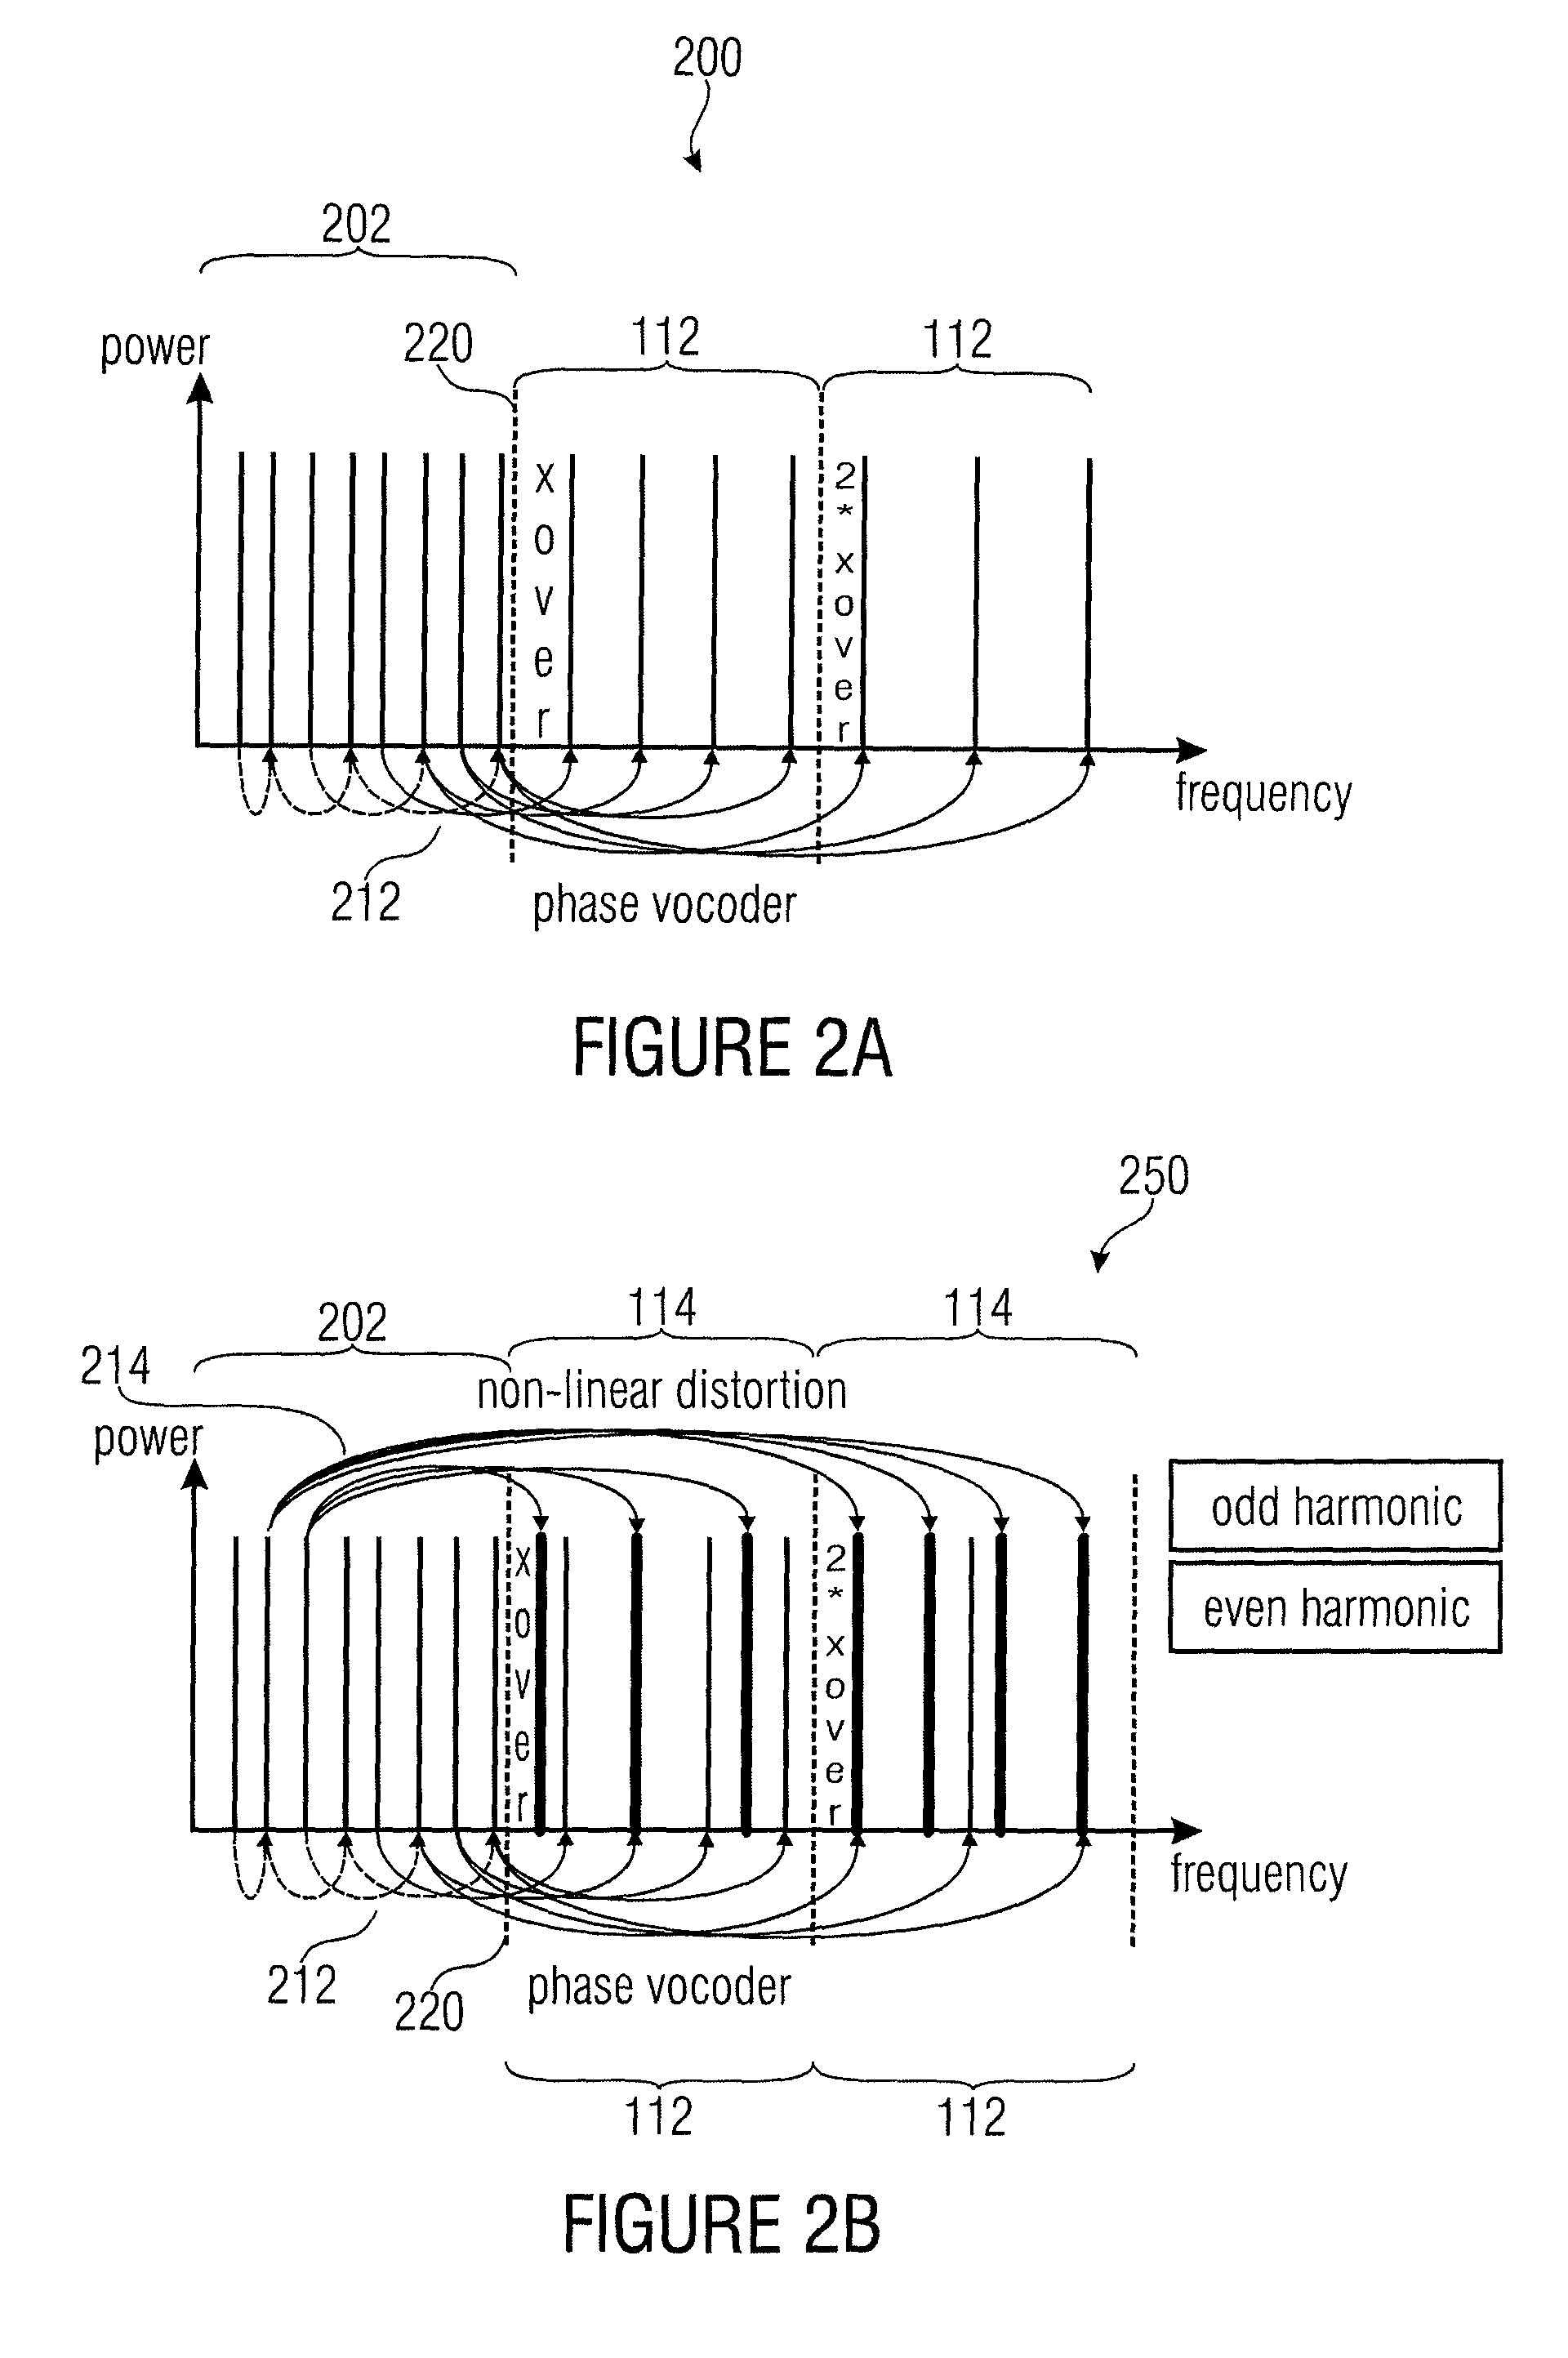 Apparatus and method for generating a bandwidth extended signal